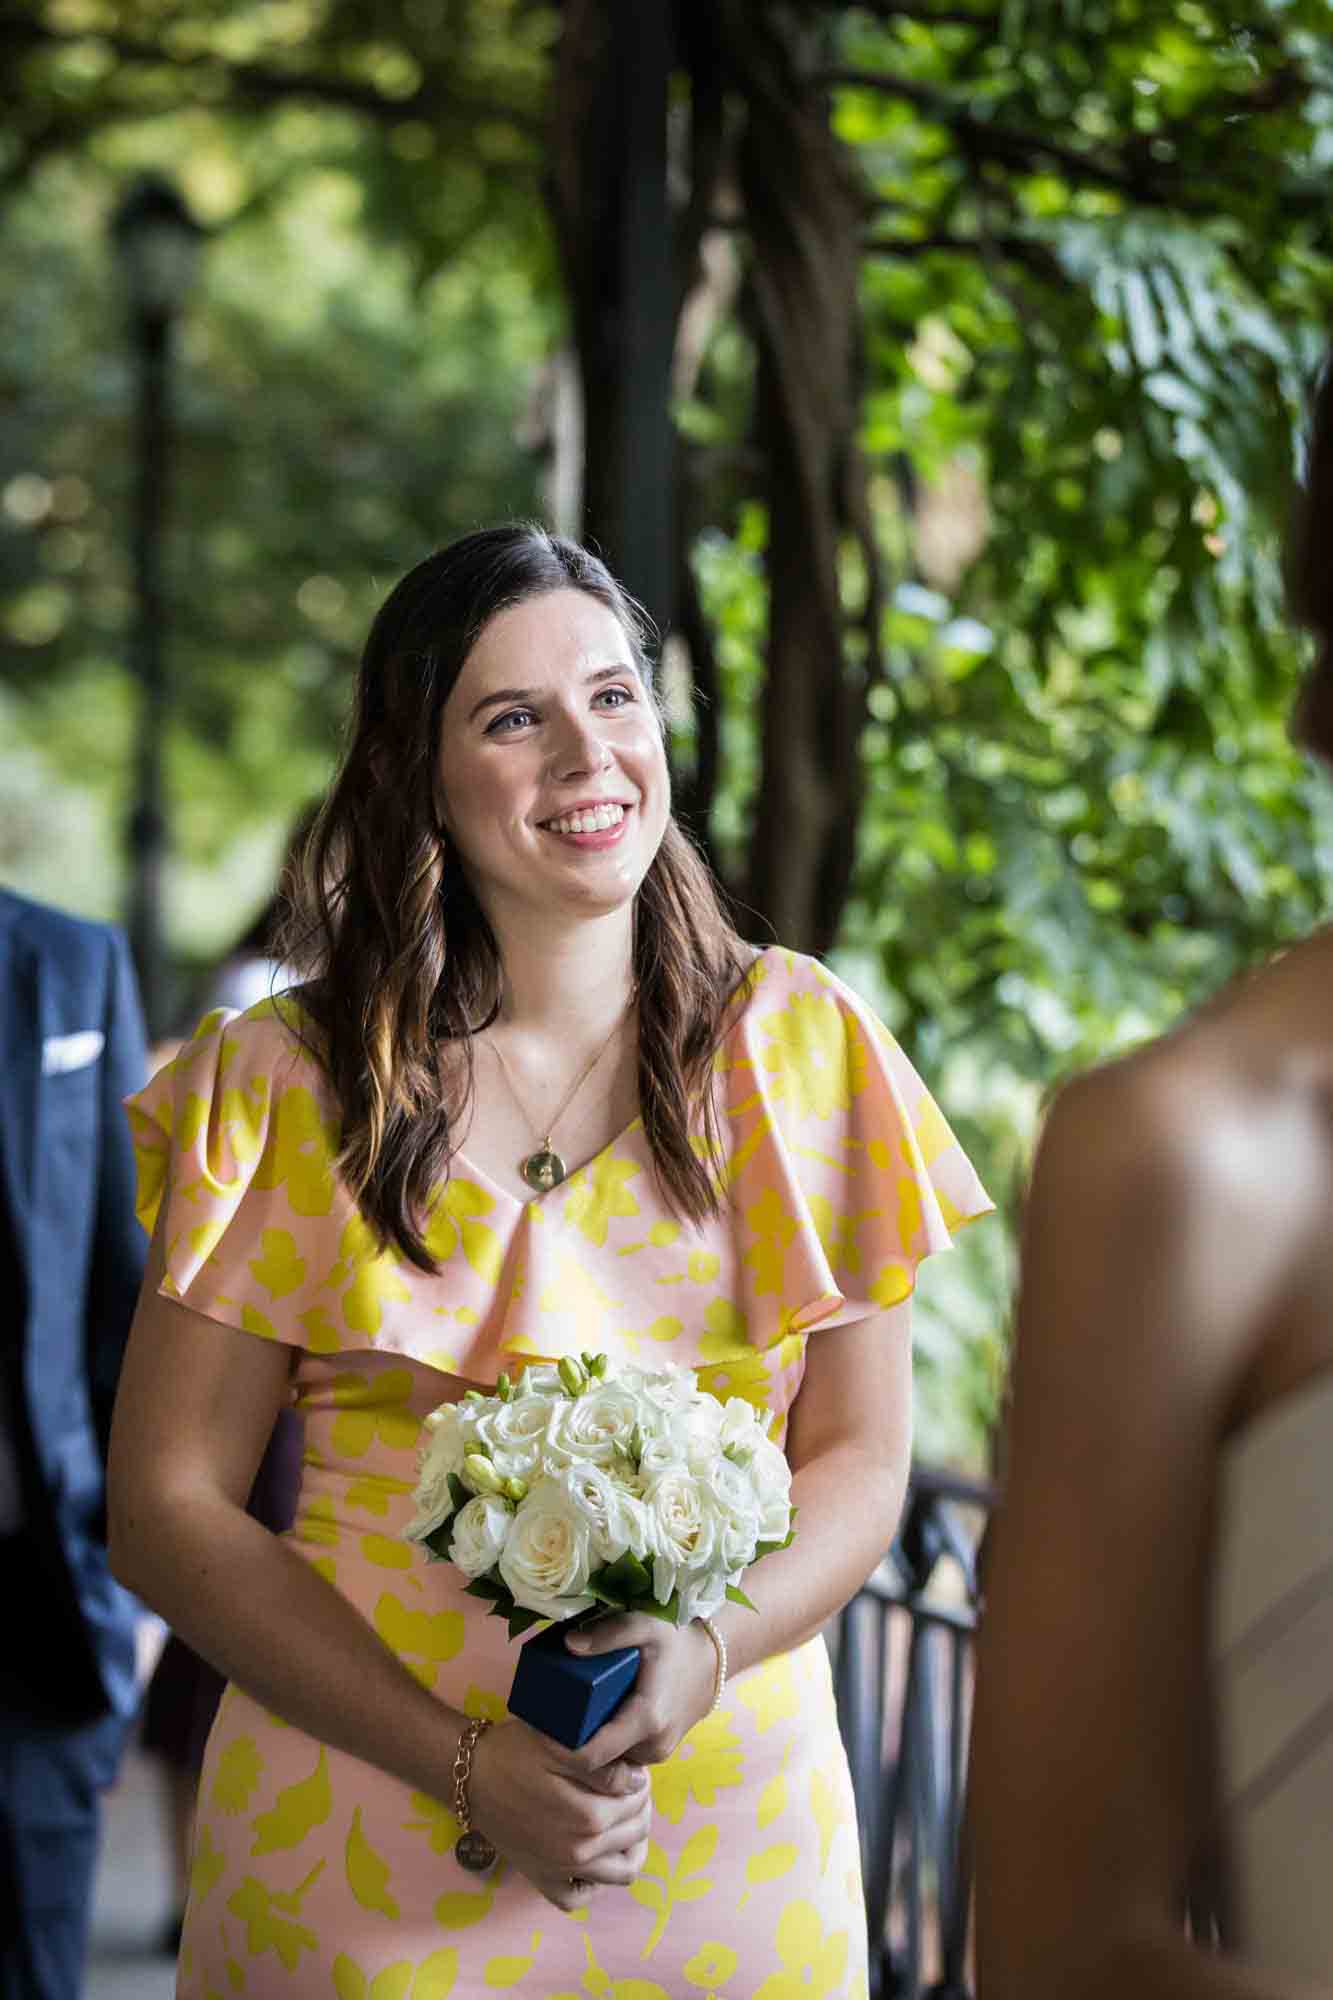 Maid of honor wearing yellow dress and holding bouquet during a Conservatory Garden wedding in Central Park